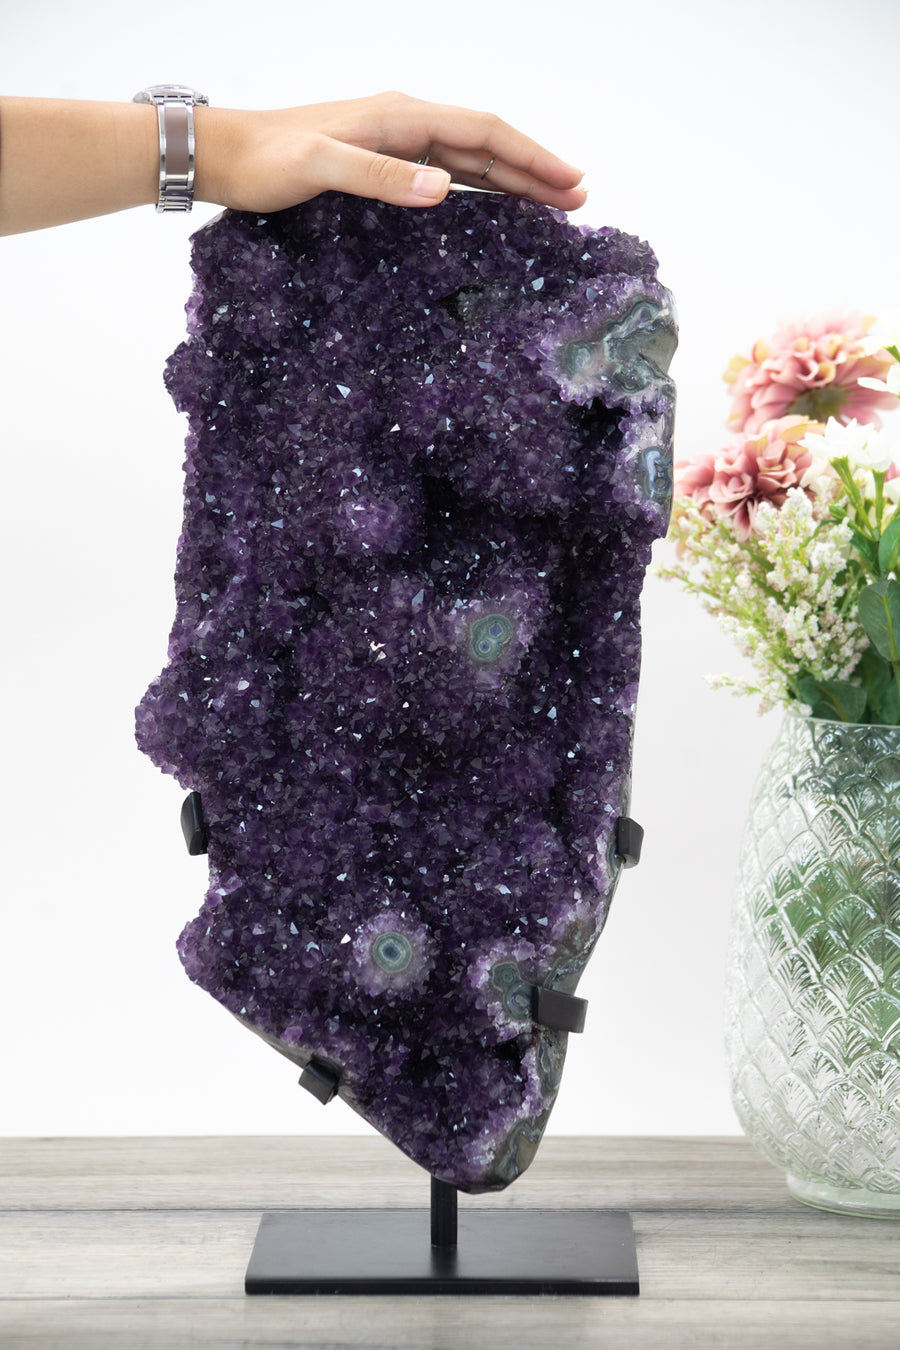 Natural XL Amethyst Cluster Full of Stalactite Formations - AWS1421